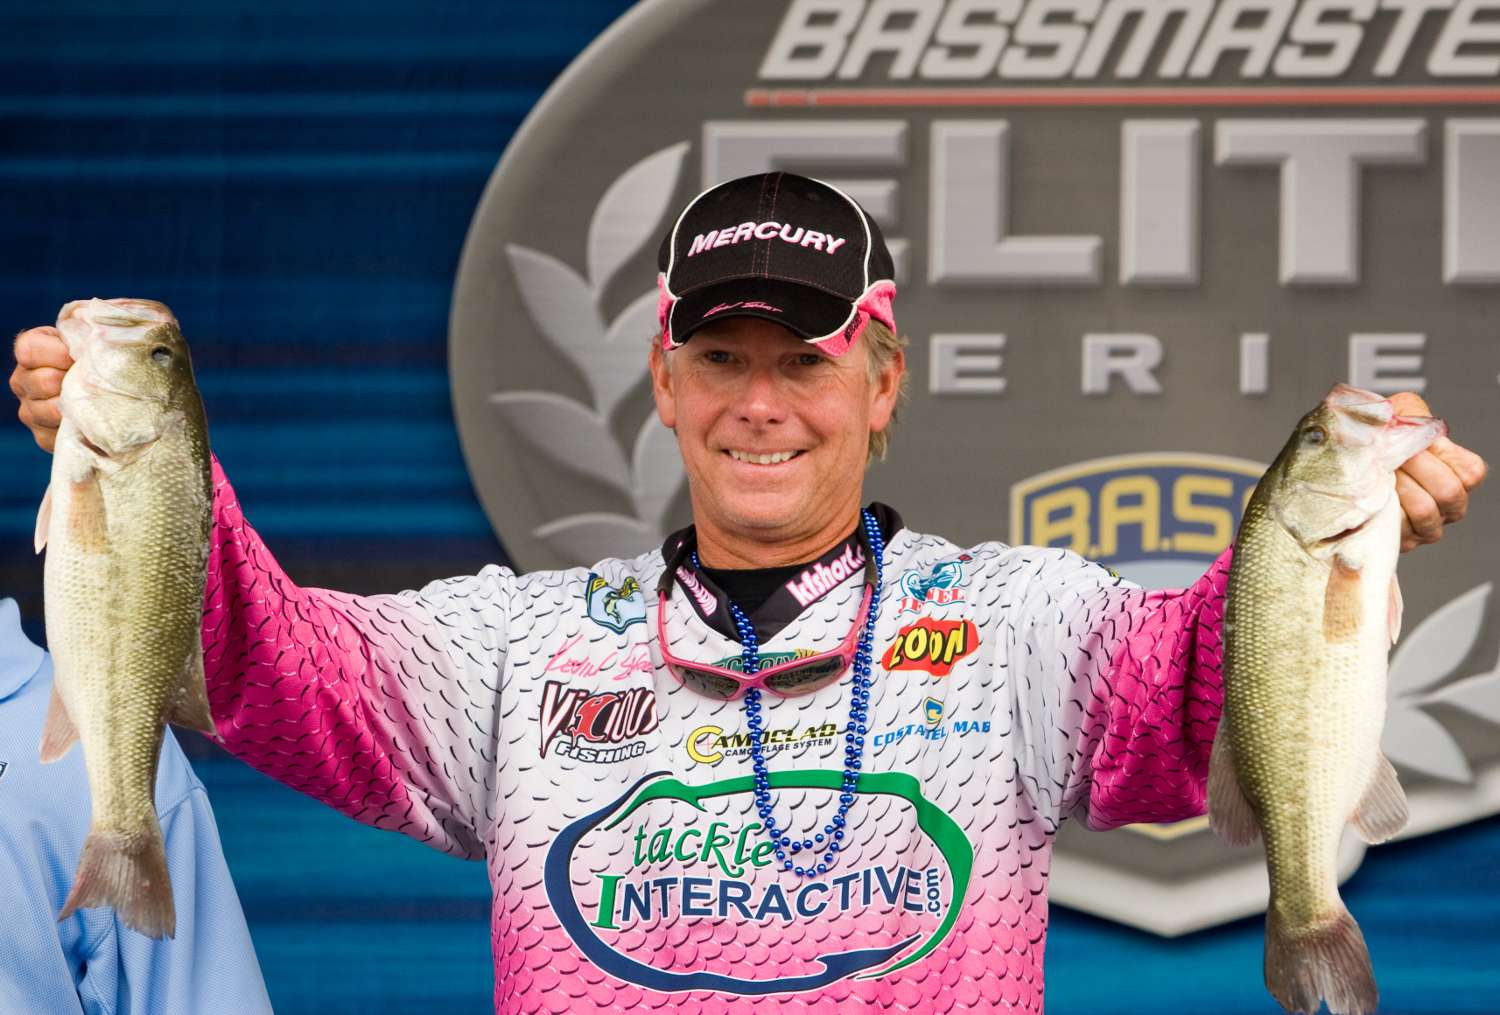 Lightest Elite Series Winning Weight: Kevin Short, 43-3
In contrast to Paul Elias' heaviest winning weight is Kevin Short's lightest winning weight record. Short won on the Mississippi River in Fort Madison, Iowa, with only 43 pounds, 3 ounces over four days. Kelly Jordon wasn't far behind in second place with 42-9. This record was in jeopardy just recently when the Bassmaster Elite Series visited the Delaware River in Philadelphia, but Mike Iaconelli managed to win that one with 47-14. Runner-up Chris Lane finished 8 pounds back; if Lane had won with his 39-14 or just a couple pounds more, he would have unseated Short.
